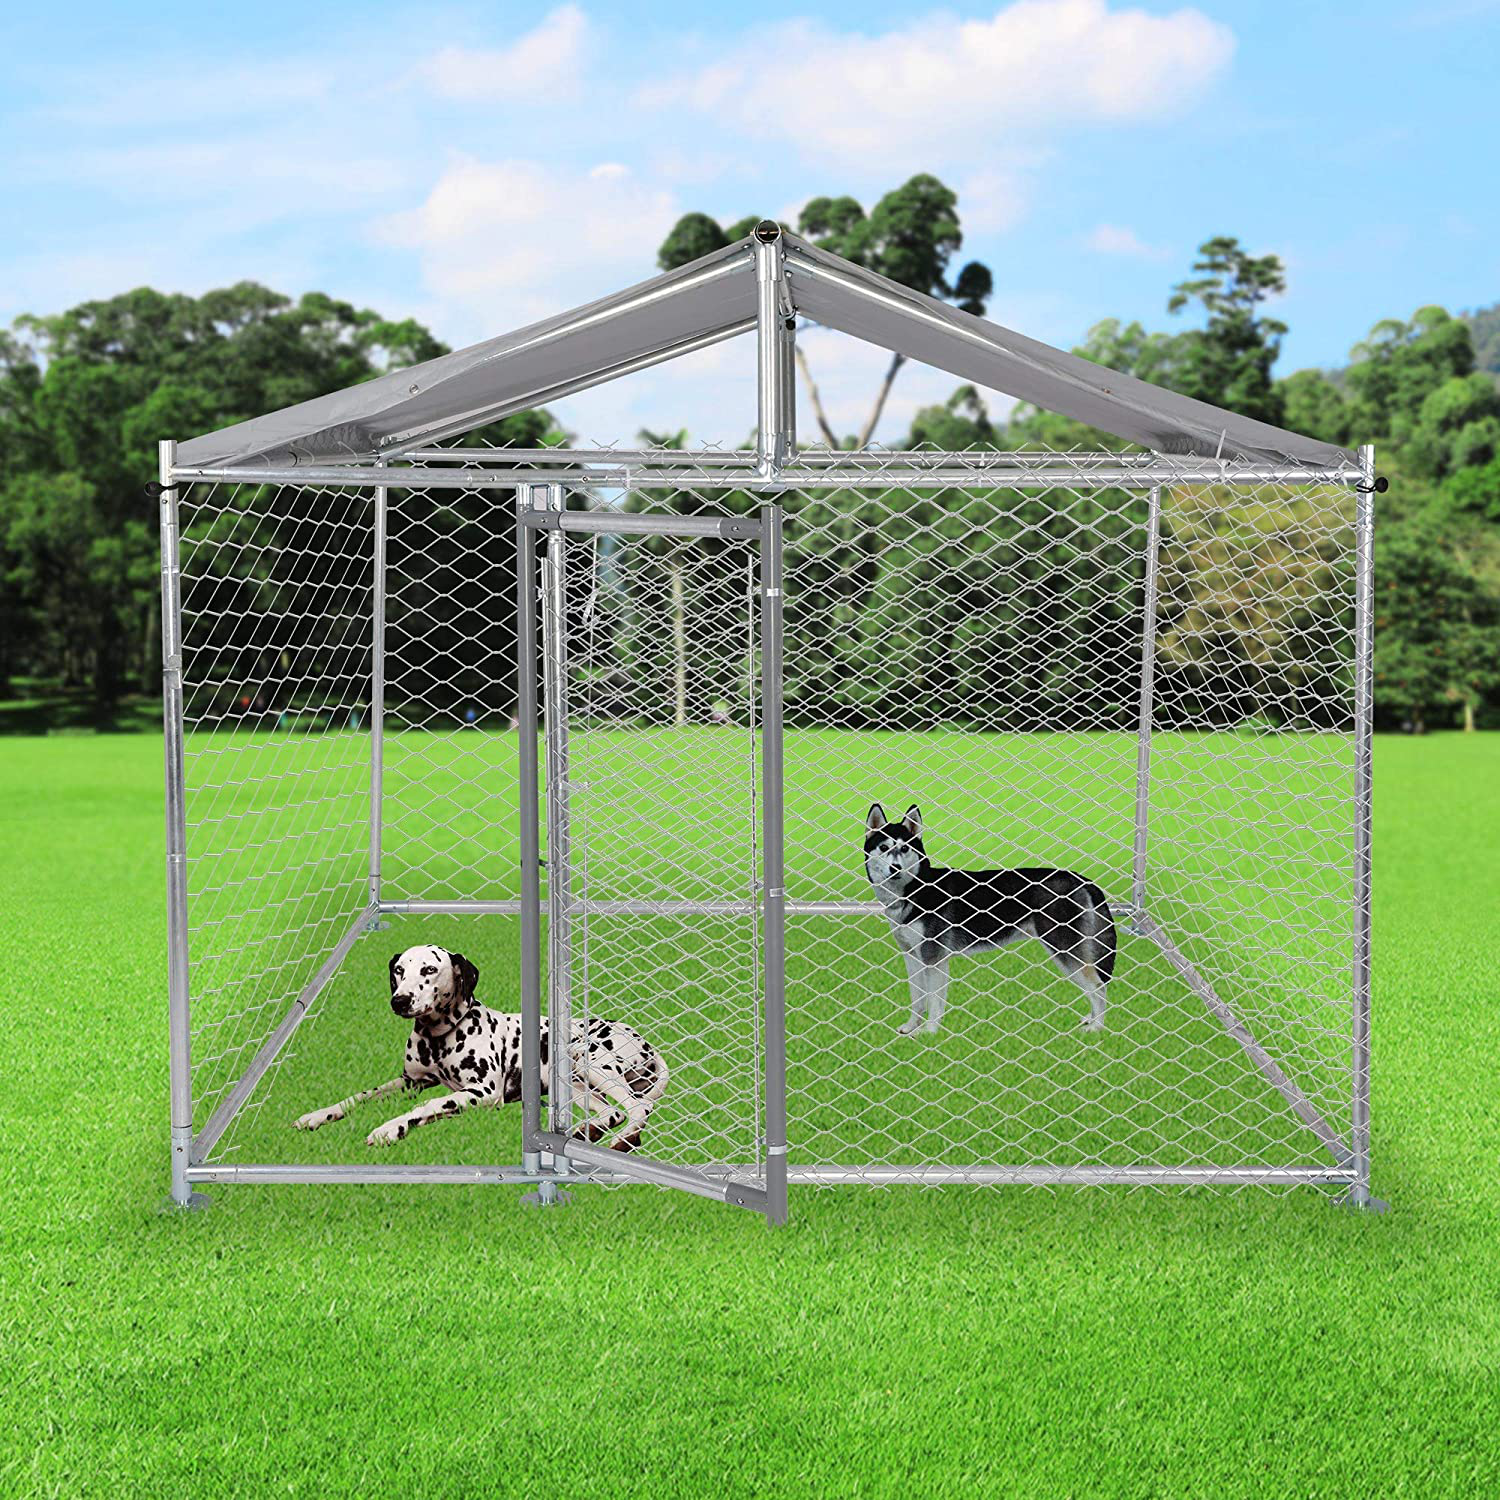 LONABR Metal Dog Playpen 10Ft/6.5Ft Exercise Fence Barrier Playpen Kennel Lockable Chain Link Kennel With/Without Water-Resistant Cover,Heavy Duty Outdoor Cage Kennel Fence for Large Dogs